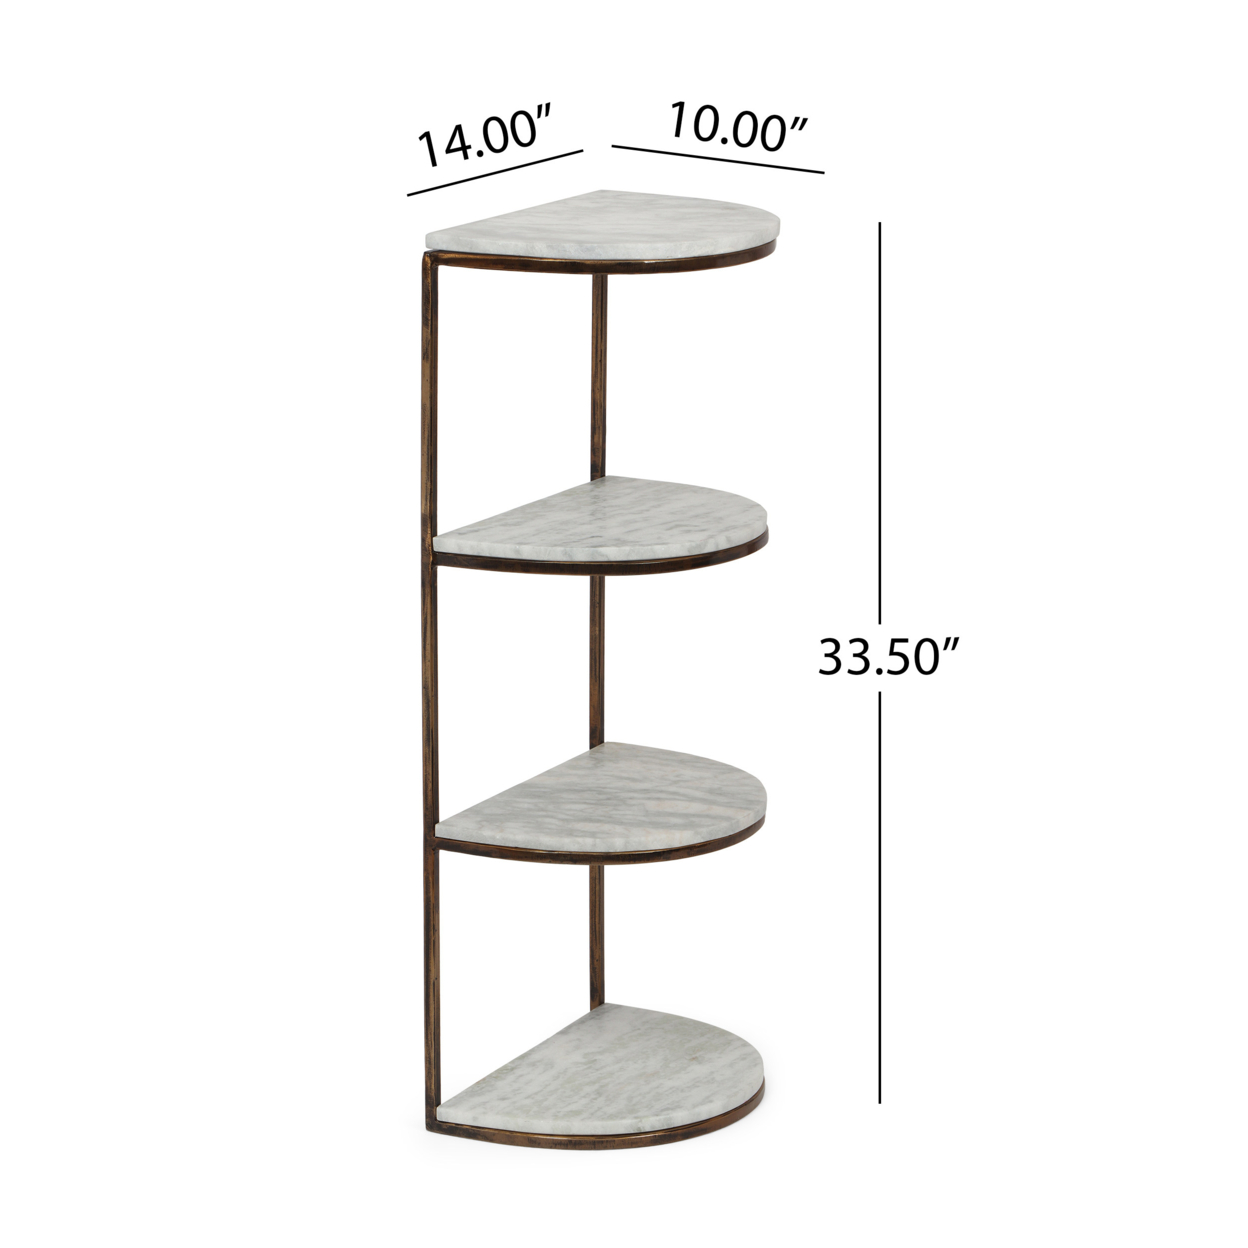 Greycliff Modern Glam Handcrafted Marble Half Round Etagere Bookcase, Natural White And Antique Brass